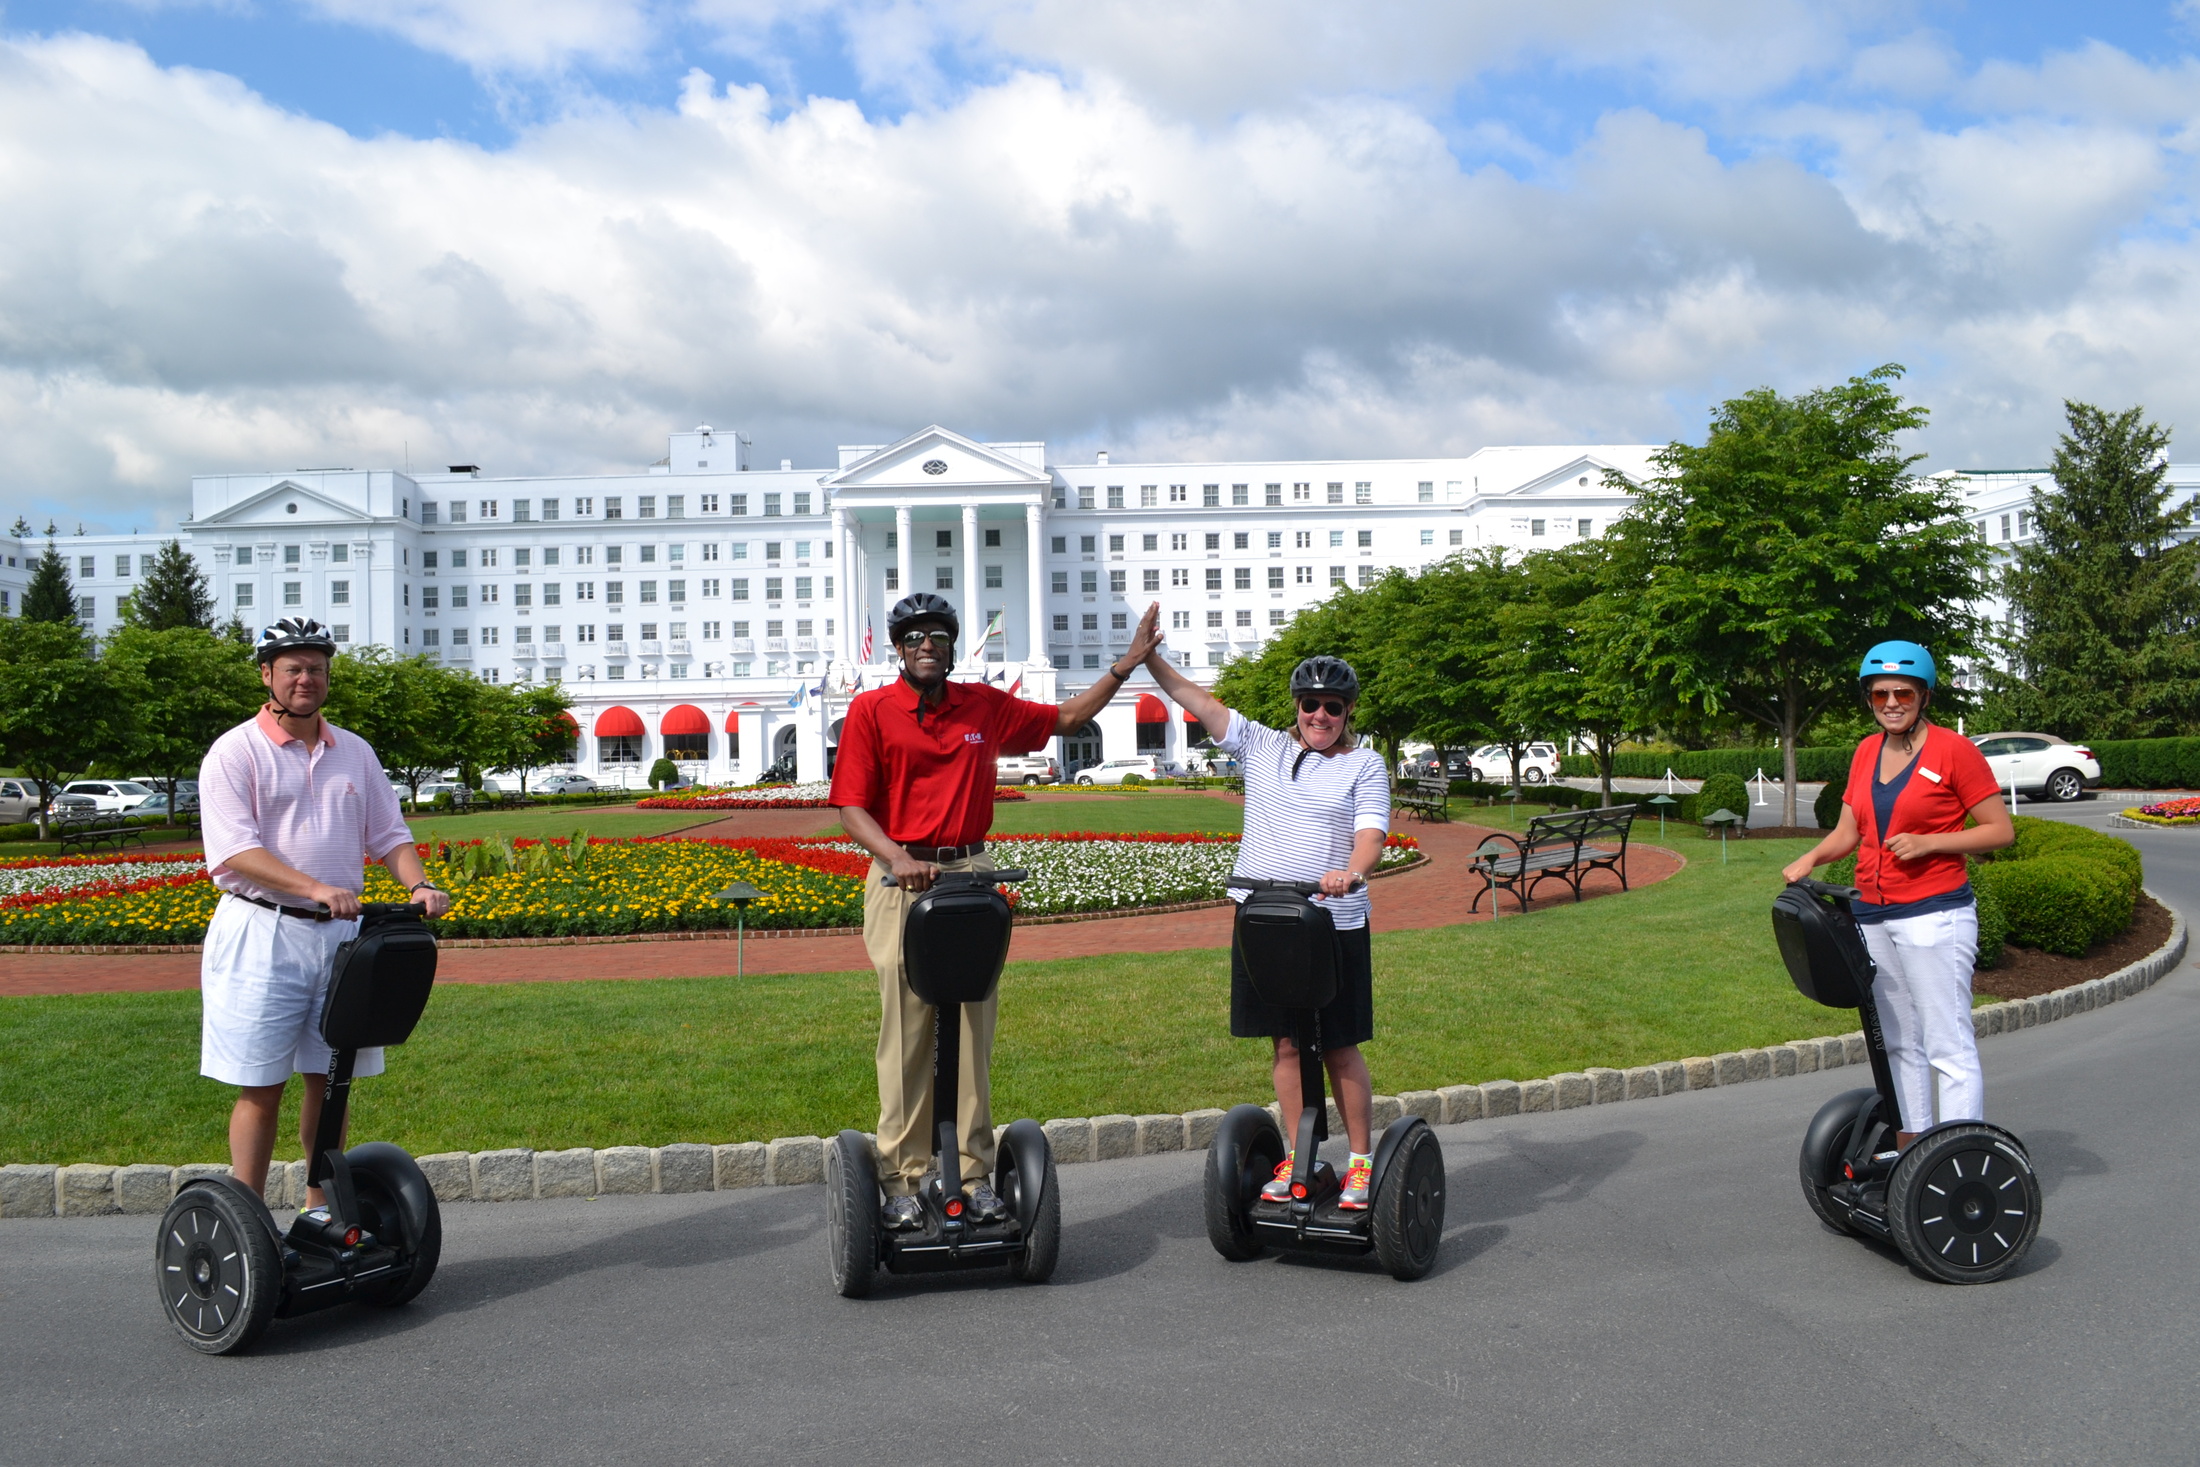 group-on-segway-tour-in-front-of-hotel